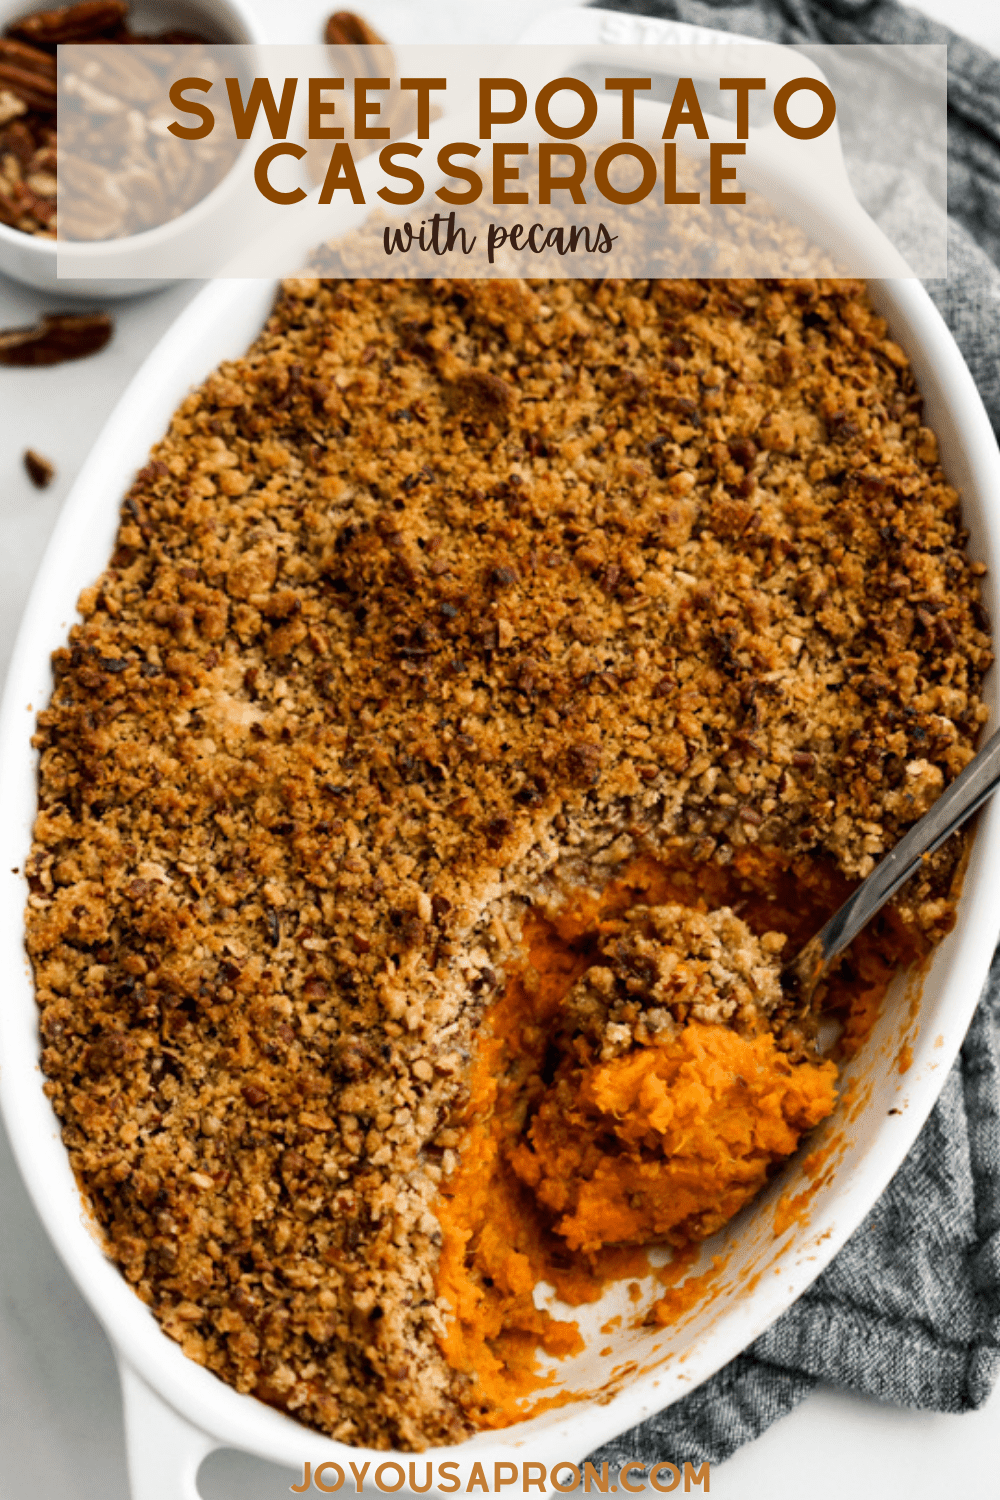 Sweet Potato Casserole with Pecans - a classic Thanksgiving and Christmas holiday side dish recipe. Flavorful and smooth mashed sweet potatoes topped with a pecan crusted crumble and baked to perfection. via @joyousapron